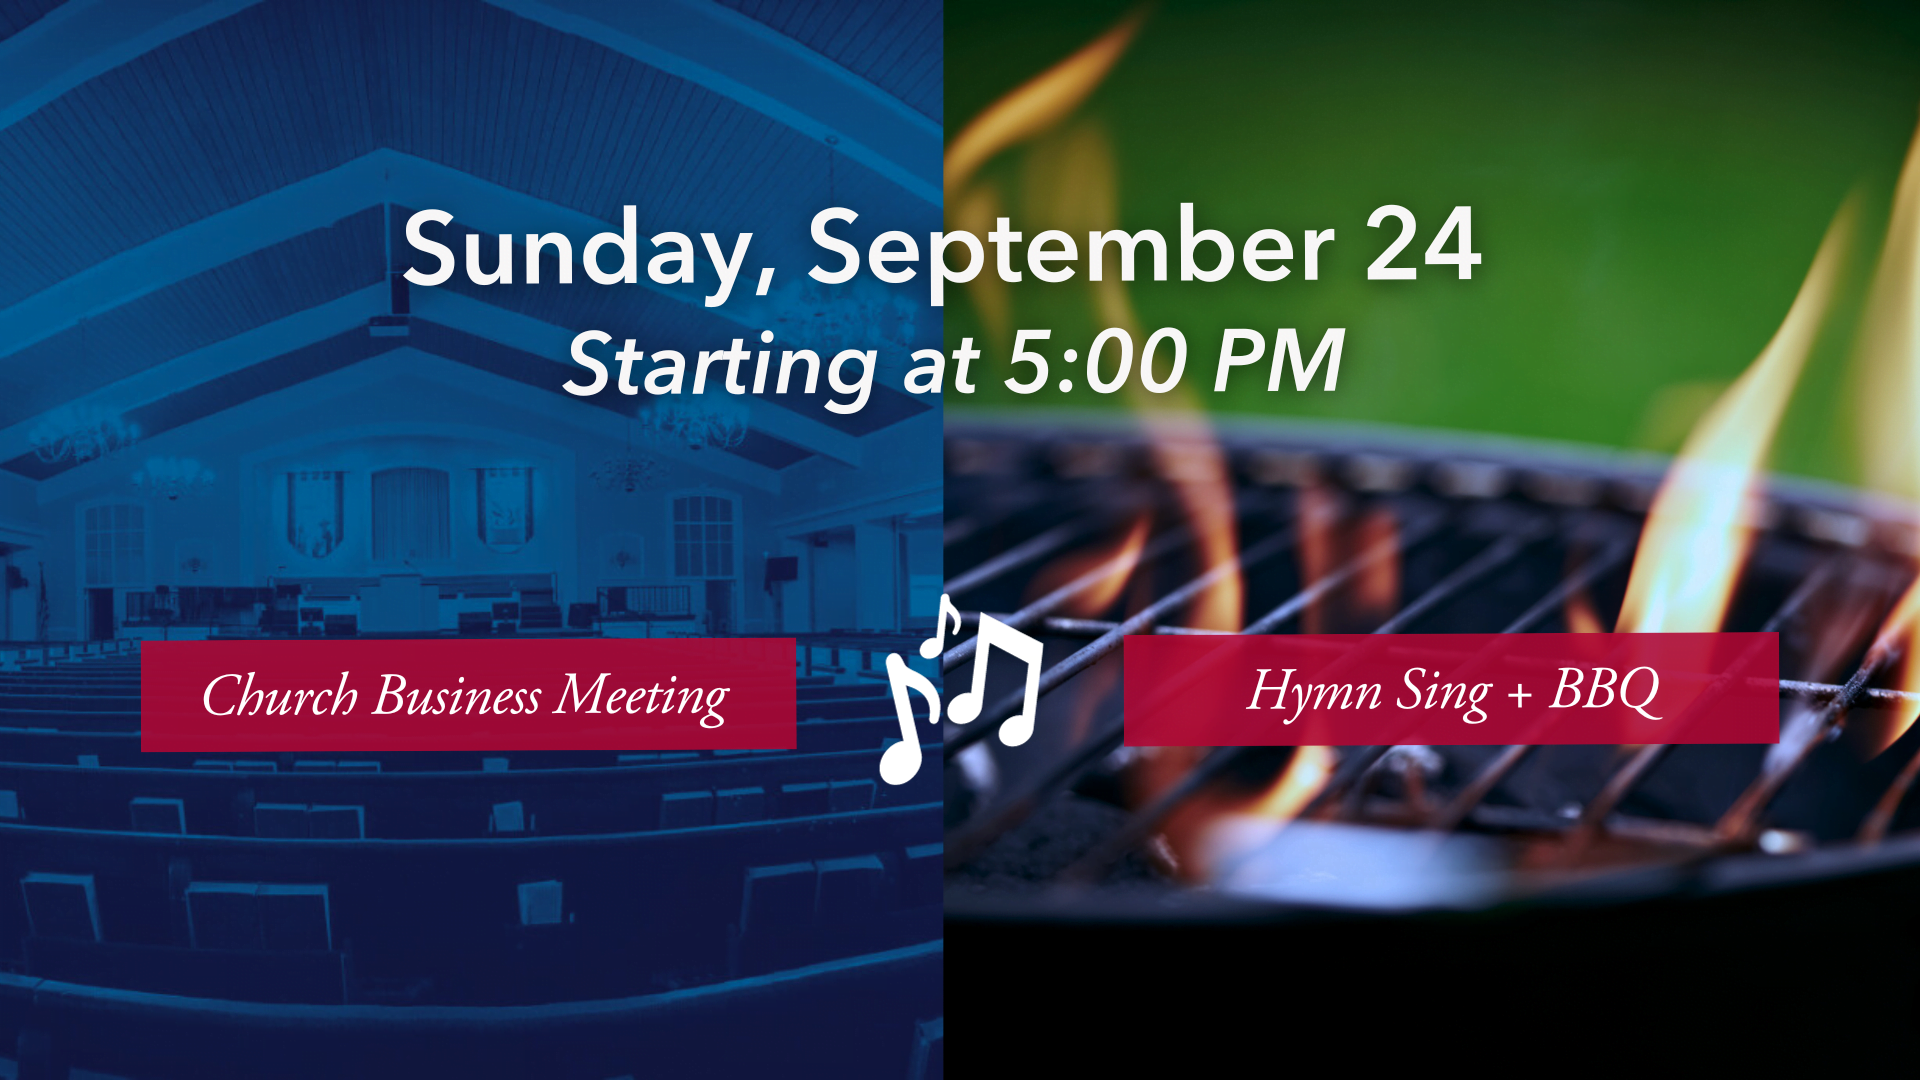 Hymn Sing and BBQ